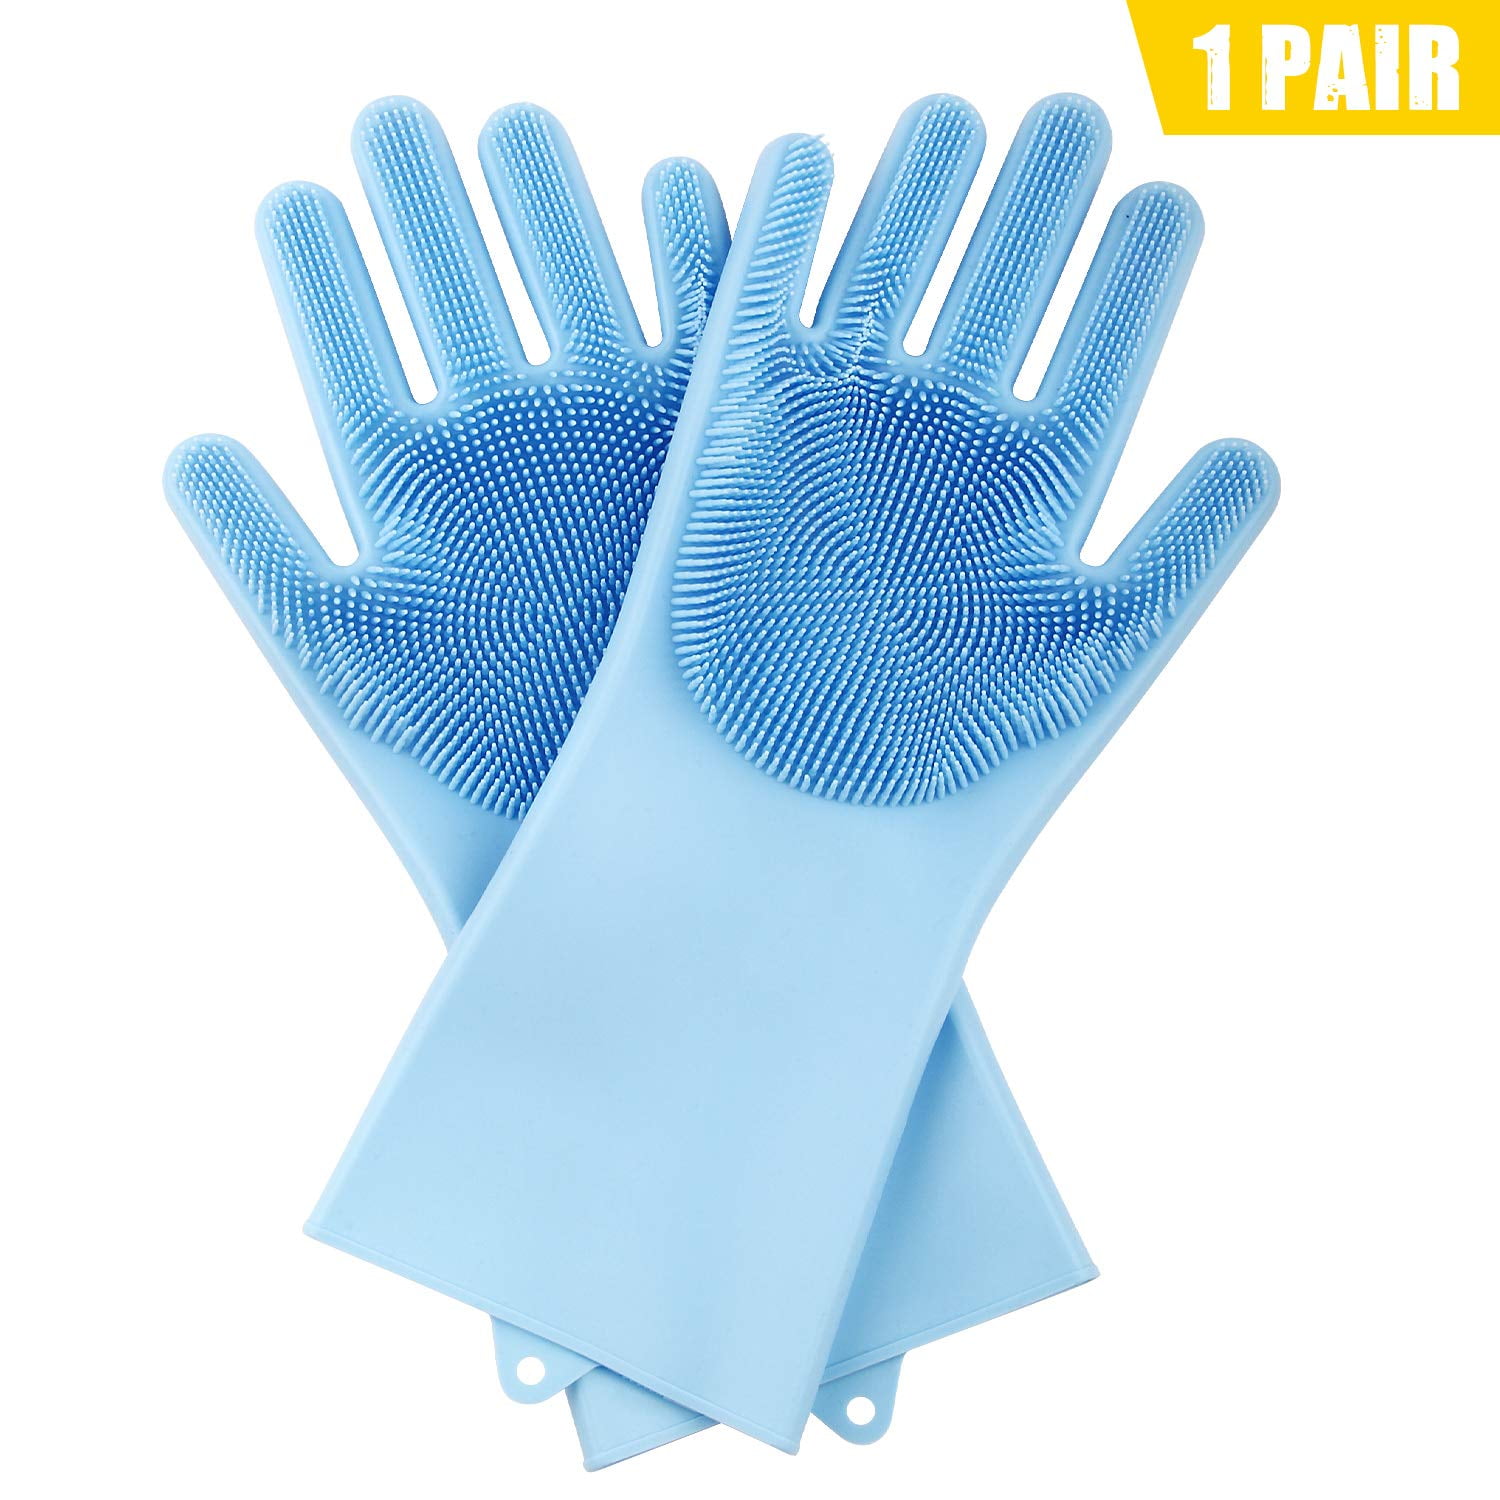 Magic Silicone Gloves with Wash Scrubber Dishwashing Gloves Washing The Car Pet Hair Care Bathroom Scrubber Cleaning Gloves for Kitchen 1 Pair 